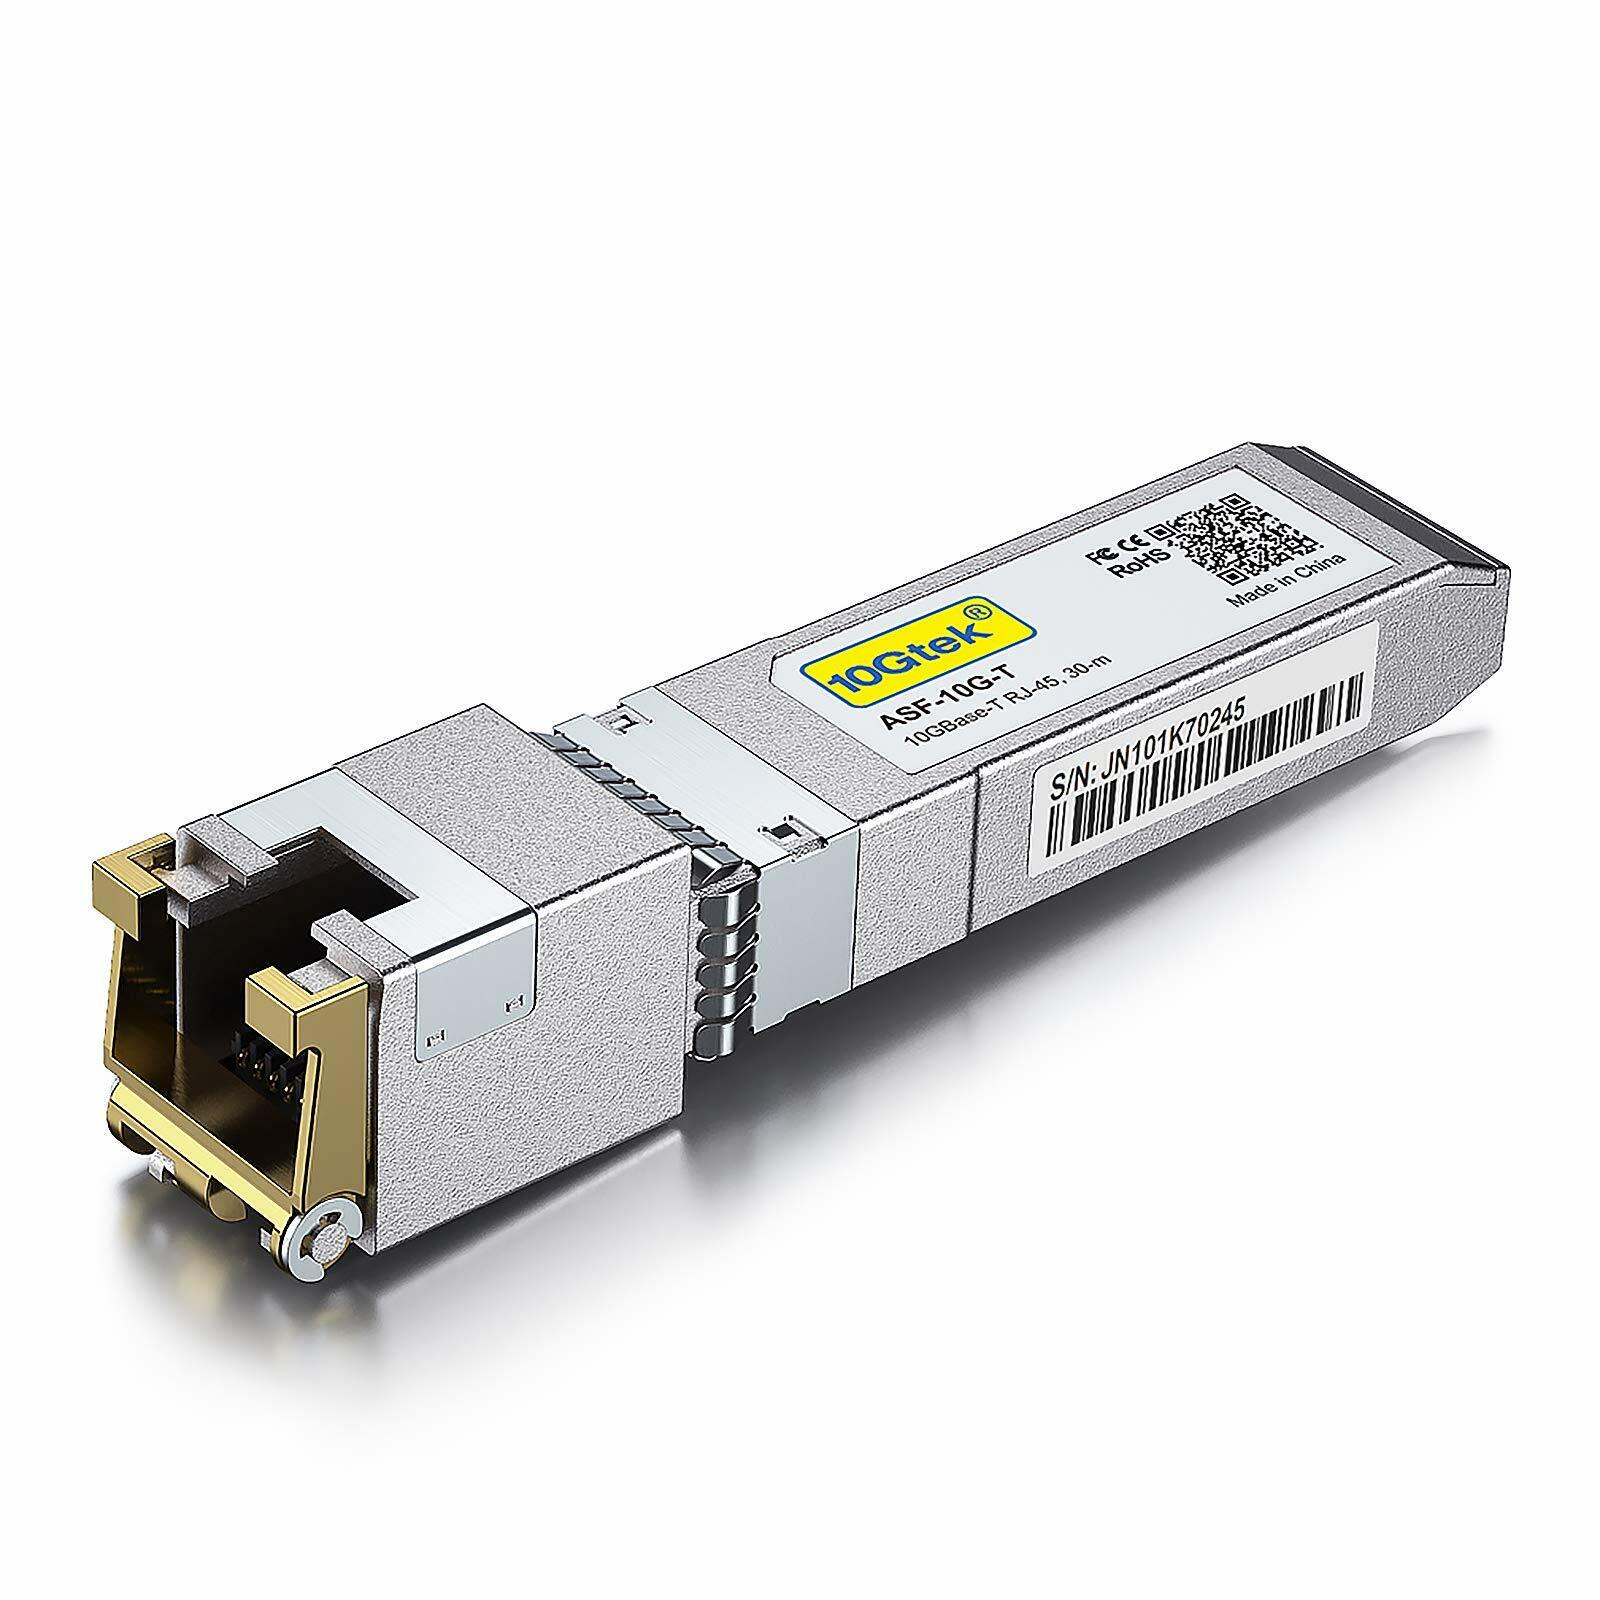 For Dell SFP 10GB SFP-10G-T 10GBASE-T SFP+ to RJ45 Optical Transceiver Module